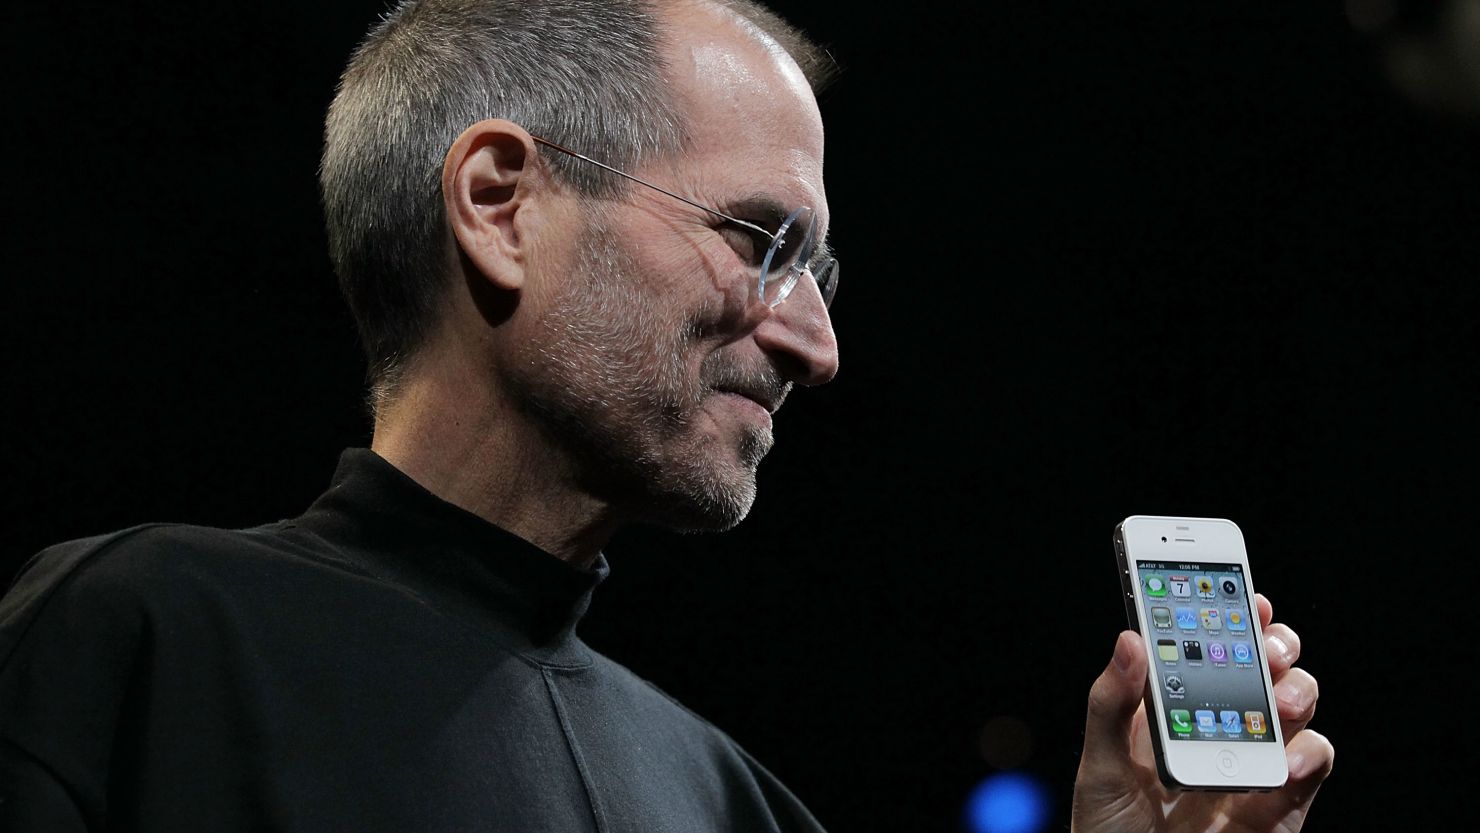 Part of Steve Jobs' genius was his drive to put easy-to-use devices in as many hands as possible, Chris Taylor says.